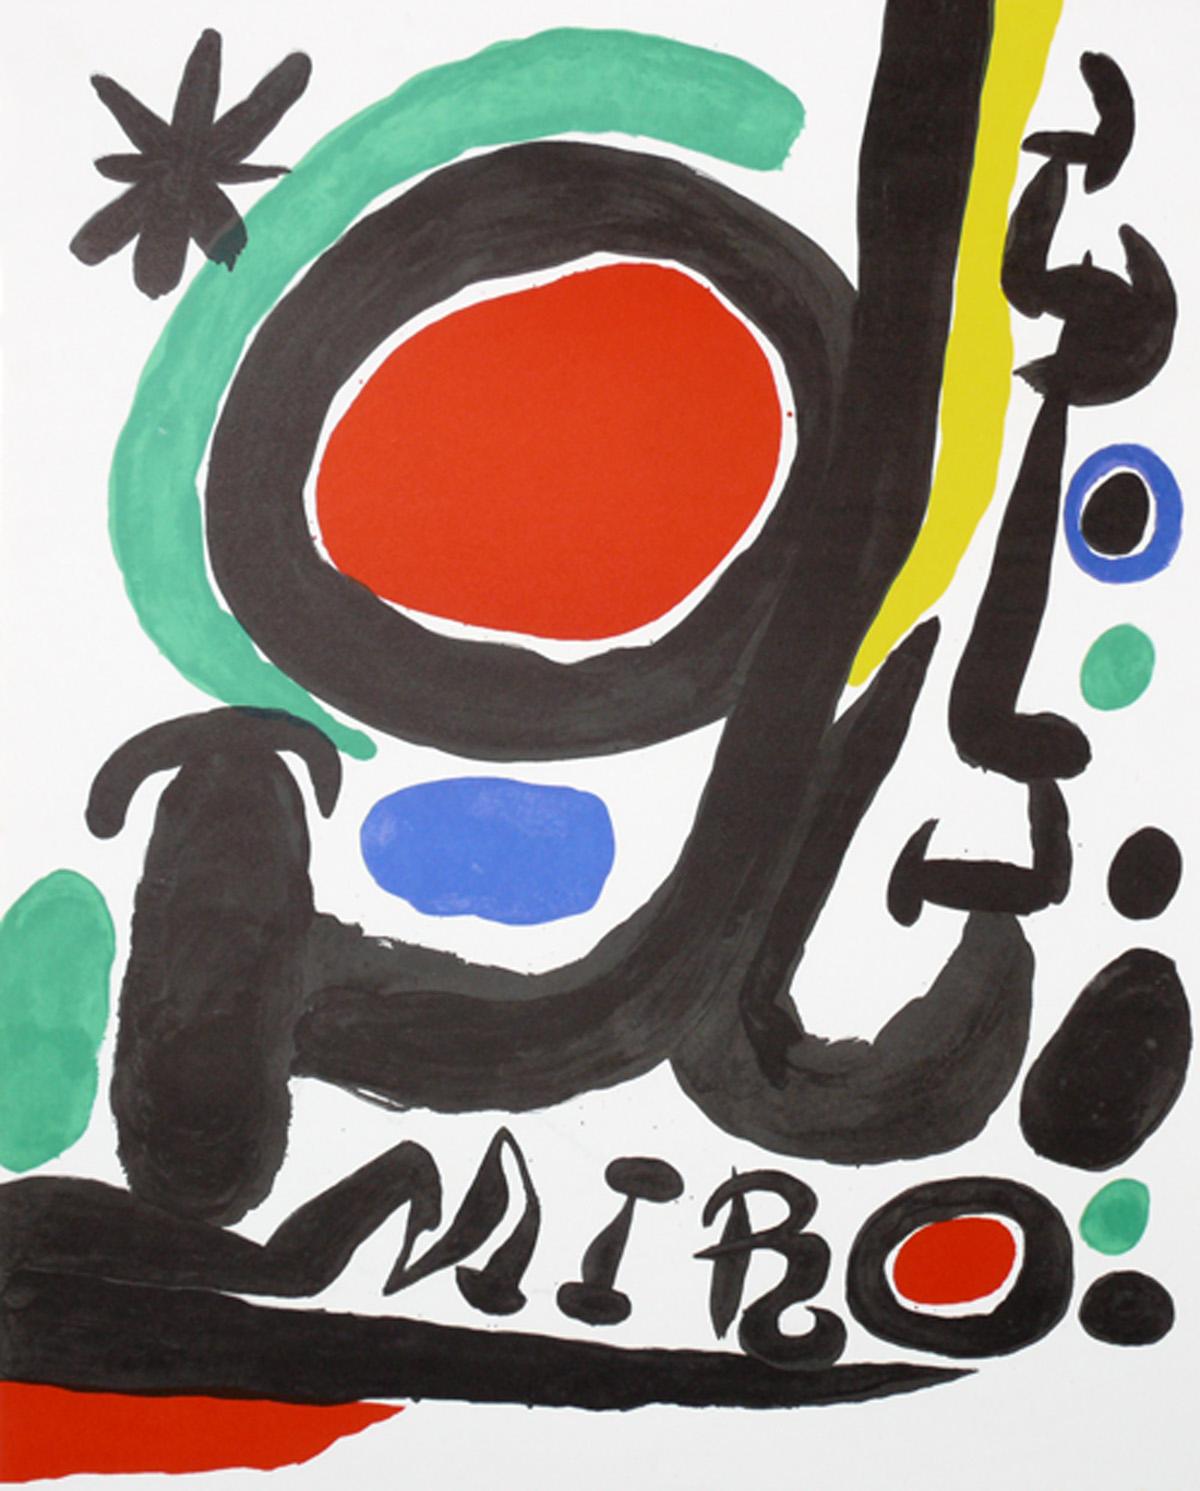 Selection of Joan Miro large color lithographs, France, circa 1960s. We purchased a group of these color lithographs from the estate of a couple that lived in France from 1951-1983. These are most likely published by the legendary Galerie Maeght.